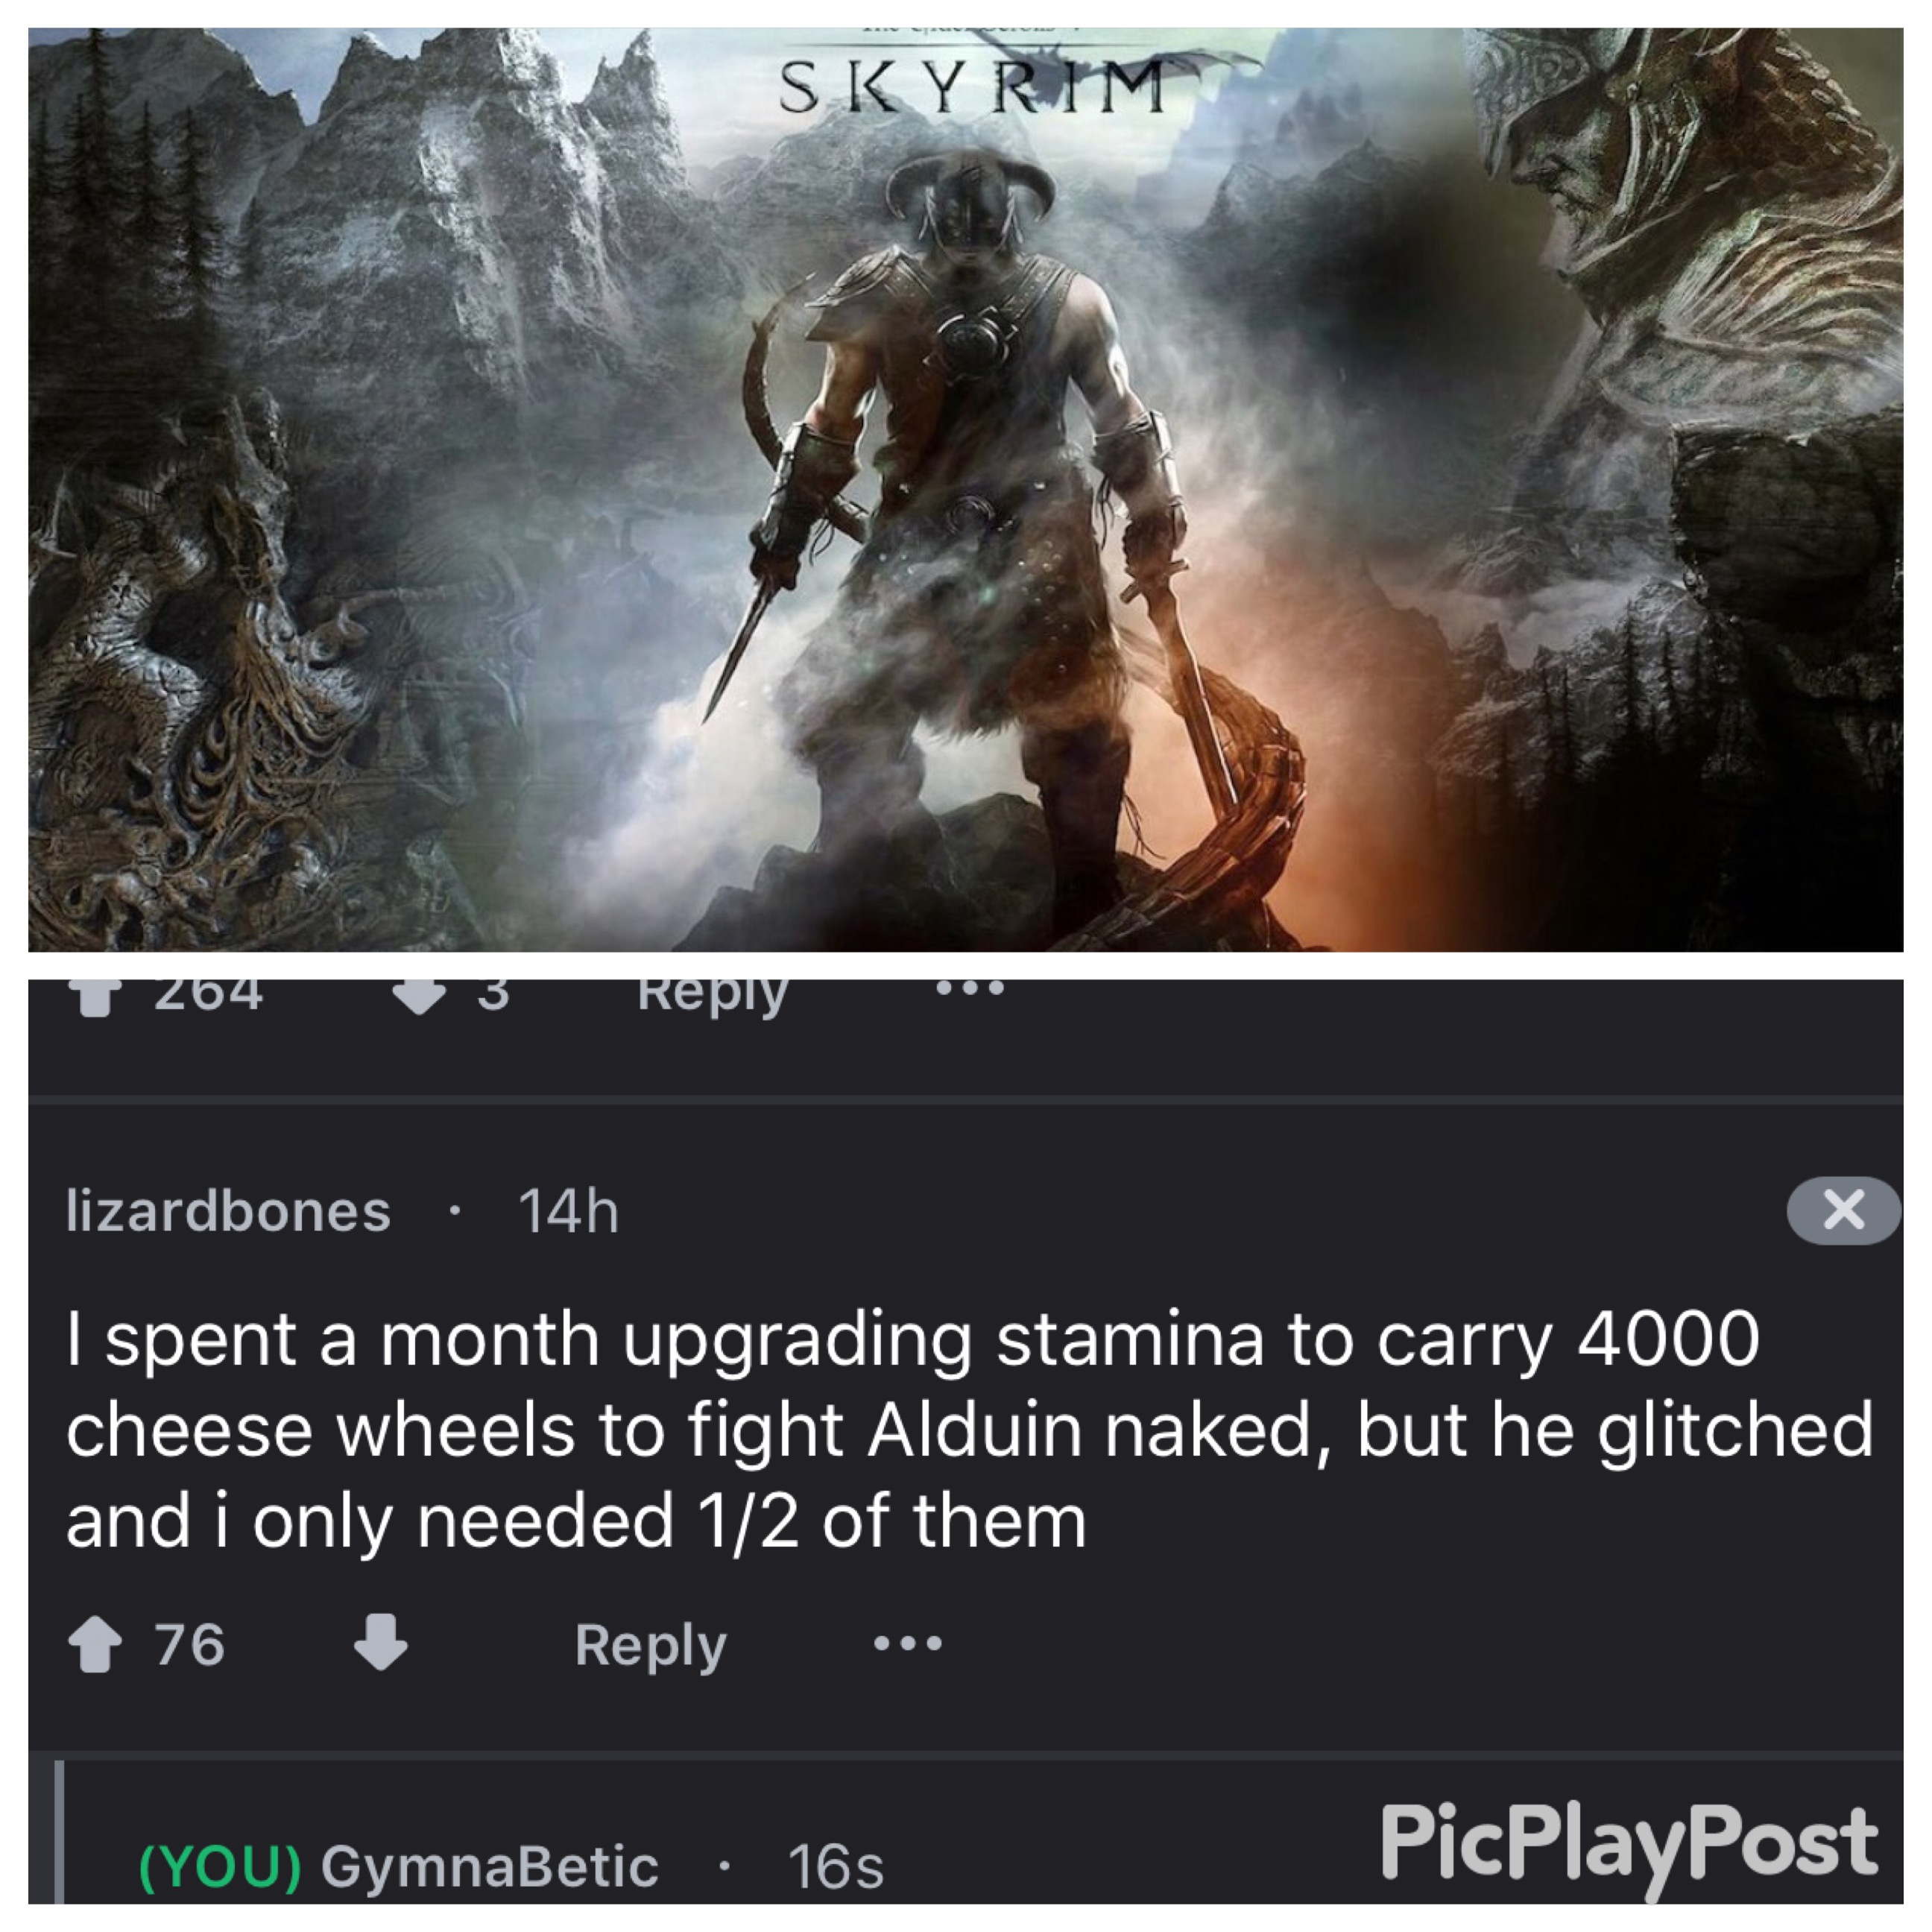 skyrim بازی - Skyrim 3 lizardbones 14h I spent a month upgrading stamina to carry 4000 cheese wheels to fight Alduin naked, but he glitched and i only needed 12 of them 76 ... You GymnaBetic 16s PicPlayPost